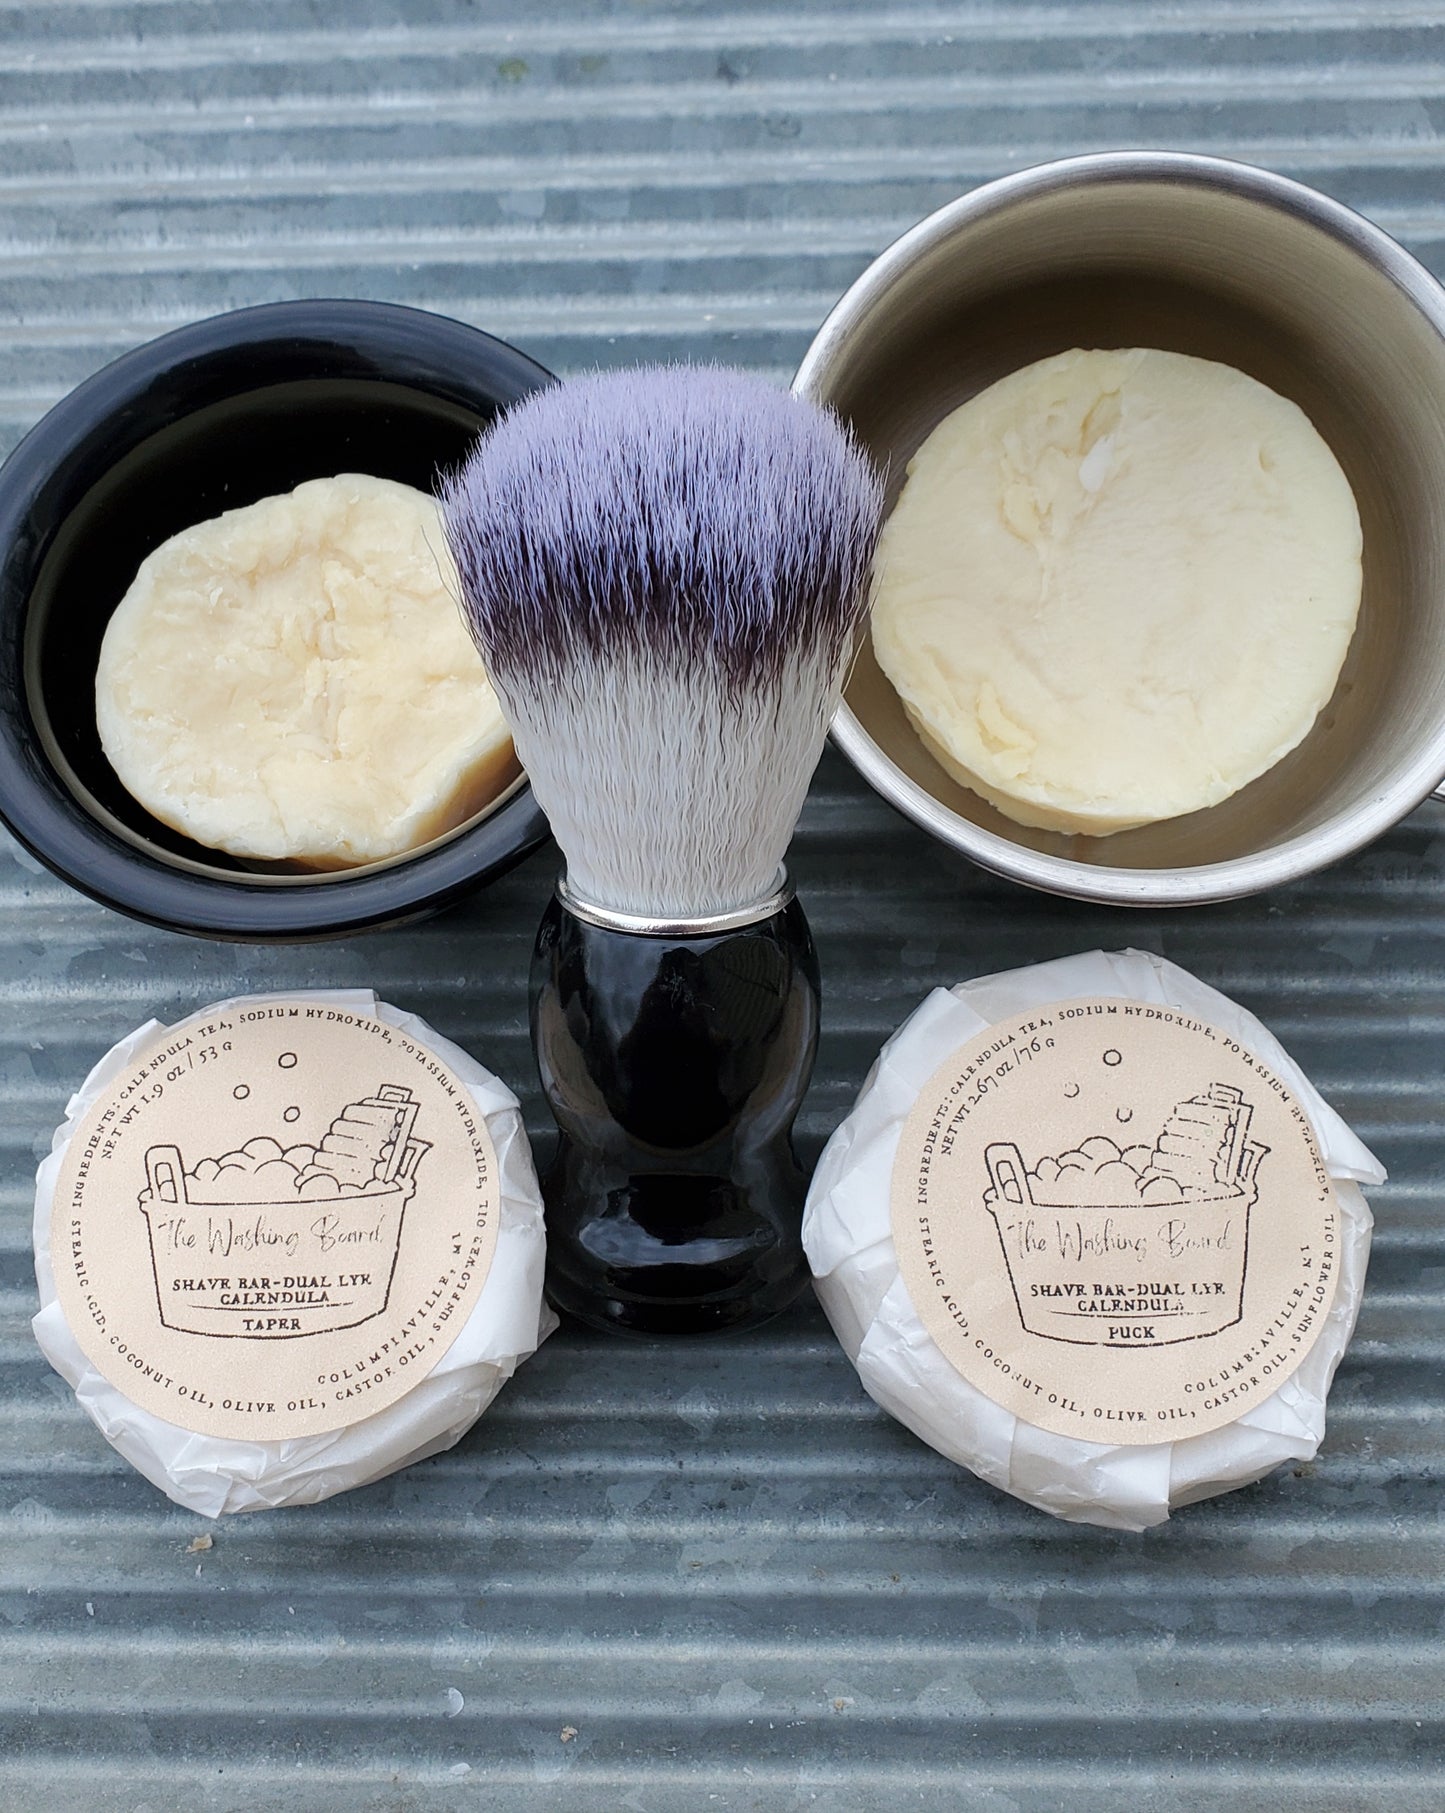 Dual Lye Shave Soaps,  "Naked" Taper in the black bowl, "naked" Puck in the stainless steel cup,  a Shave Brush, a wrapped taper and a wrapped puck.